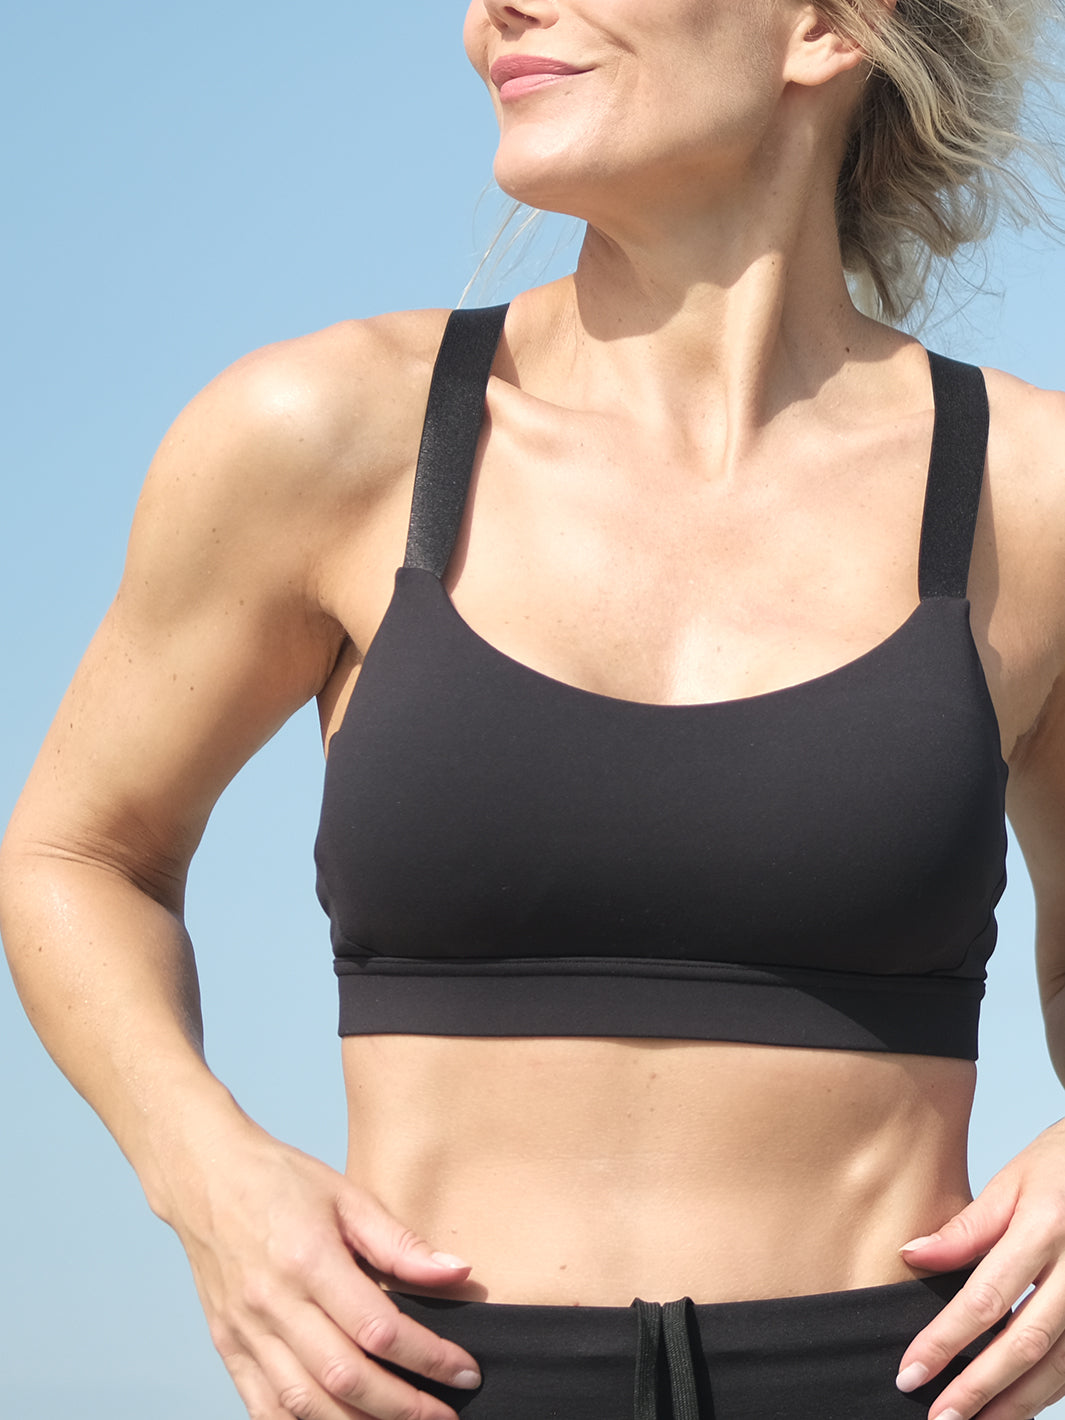 It looks and feels like a normal bra', Corewell Health